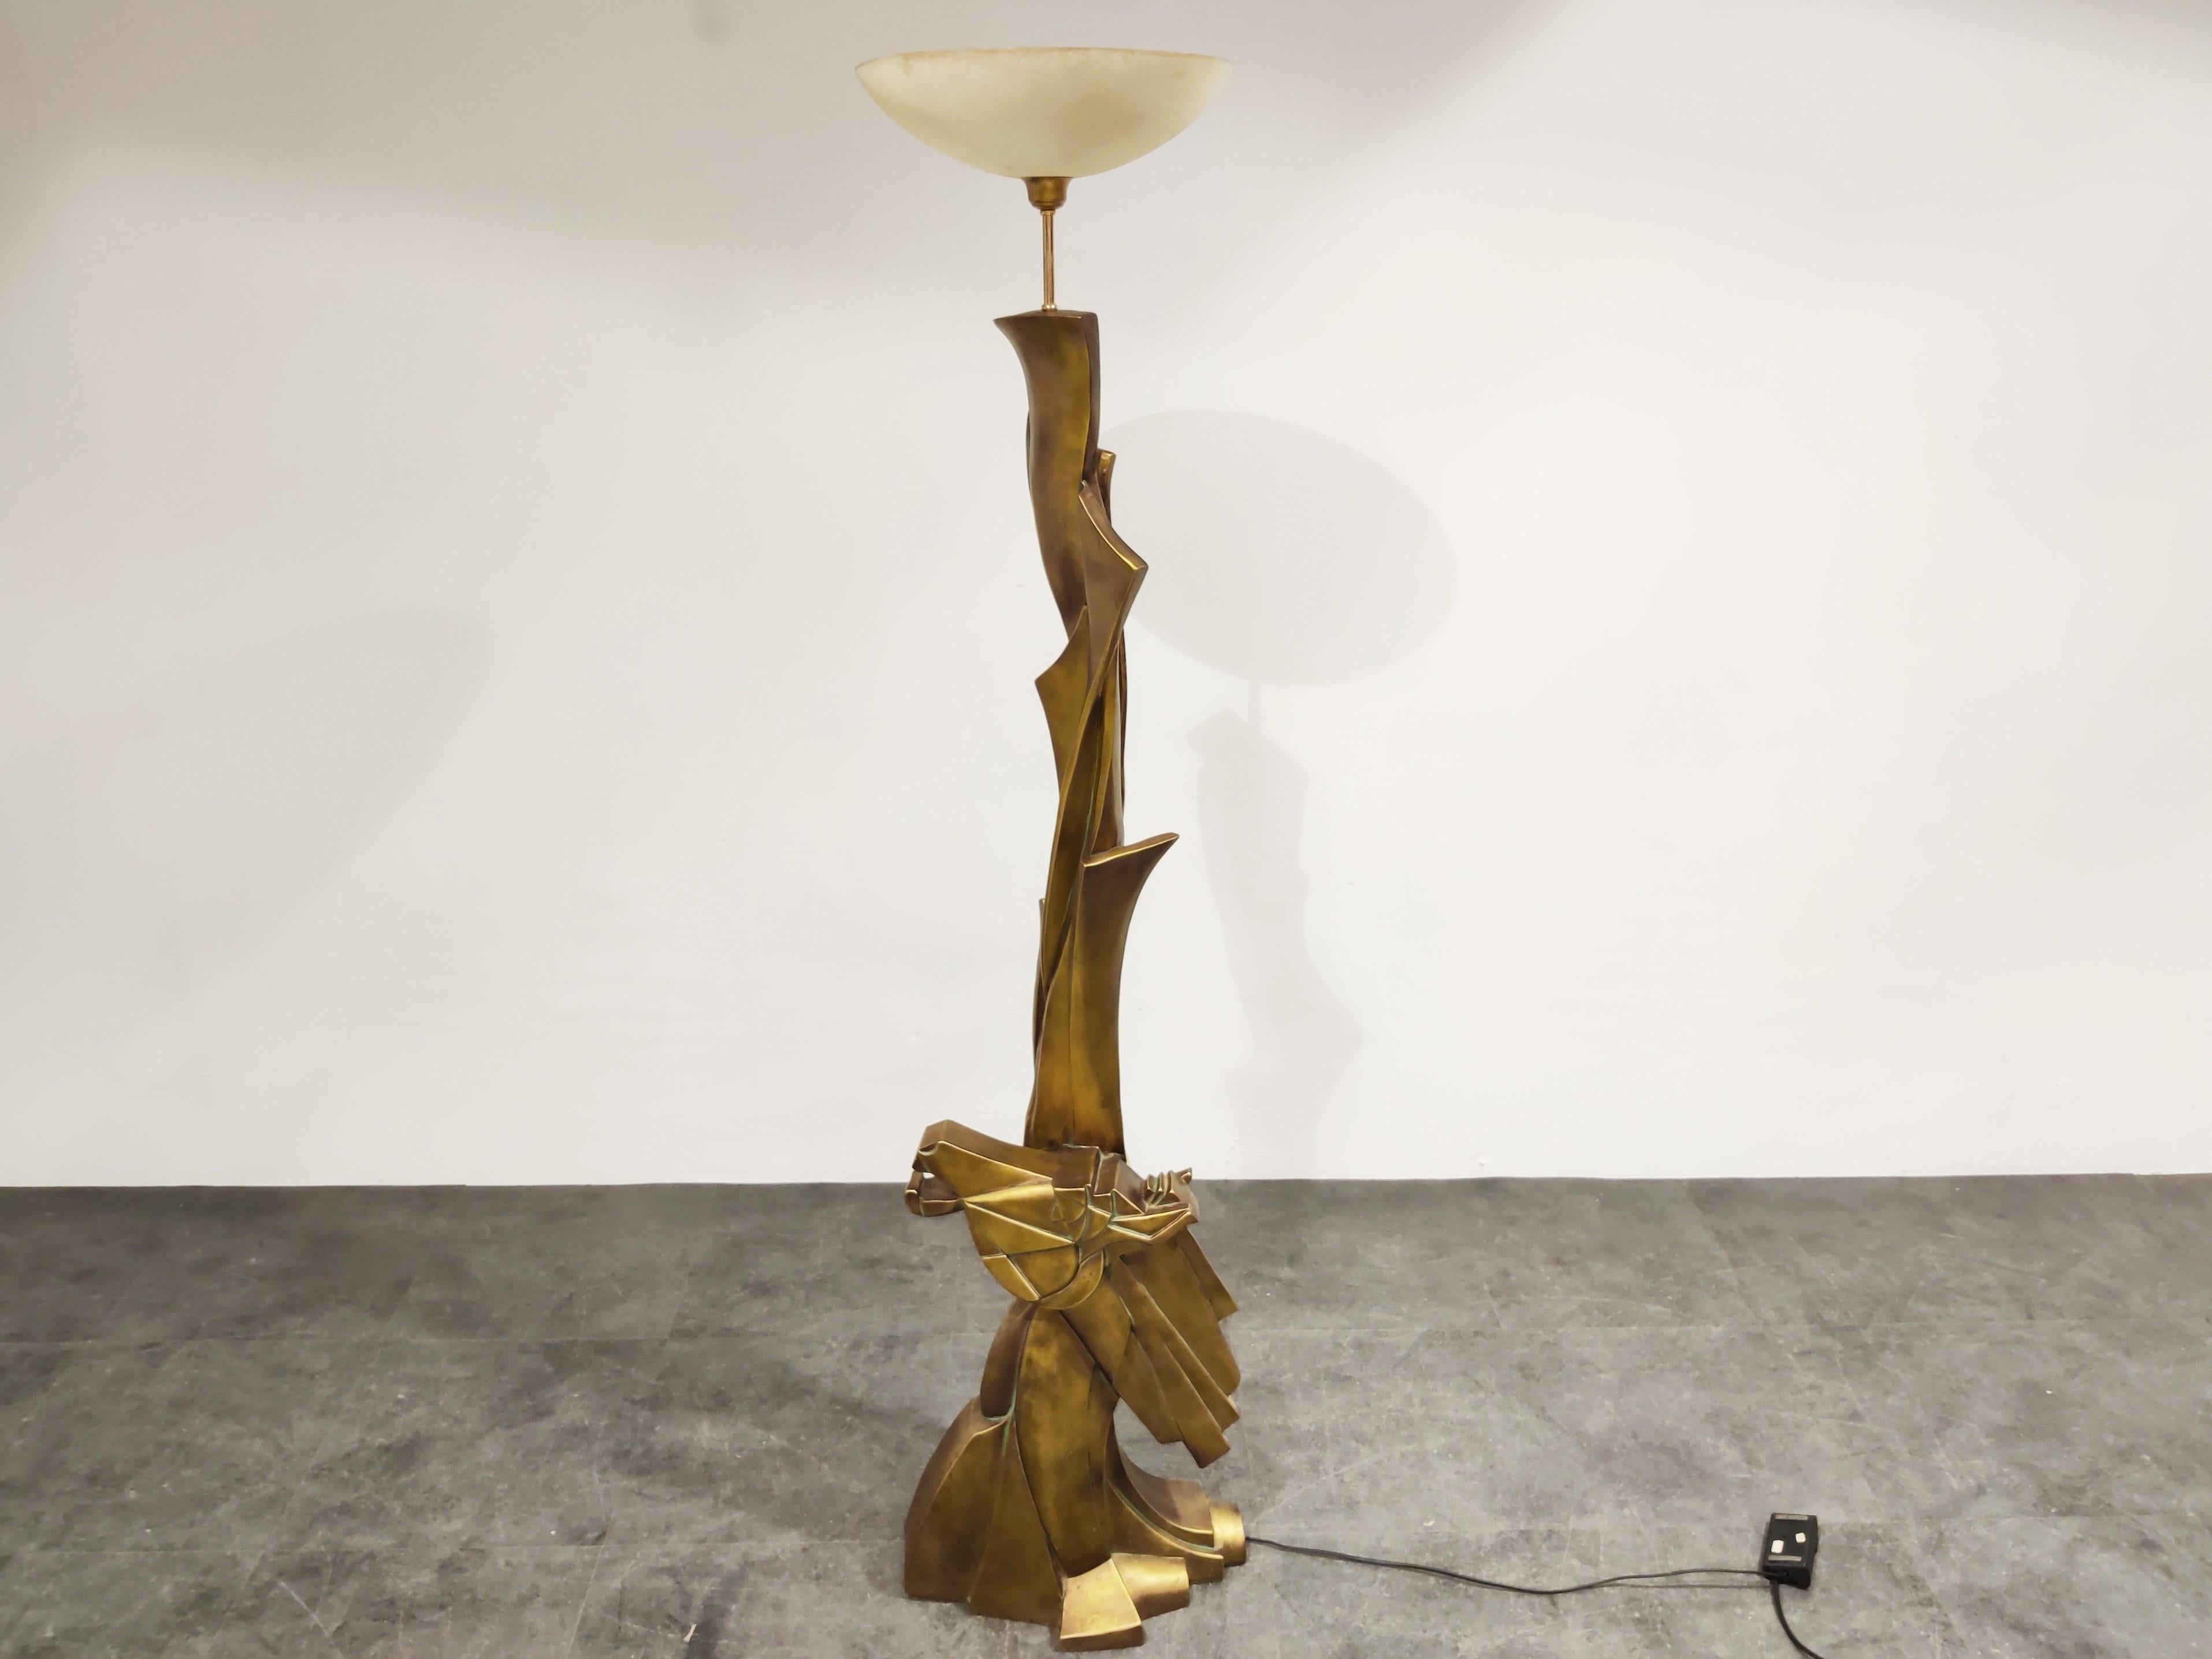 Stately Brutalist design horse head floor lamp made from heavy sculpted resin.

Gold/patinated bronze look.

Torchiere stained glass lamp shade made in Italy.

Beautiful statement piece. 

1980s, Italy

Measures: Height